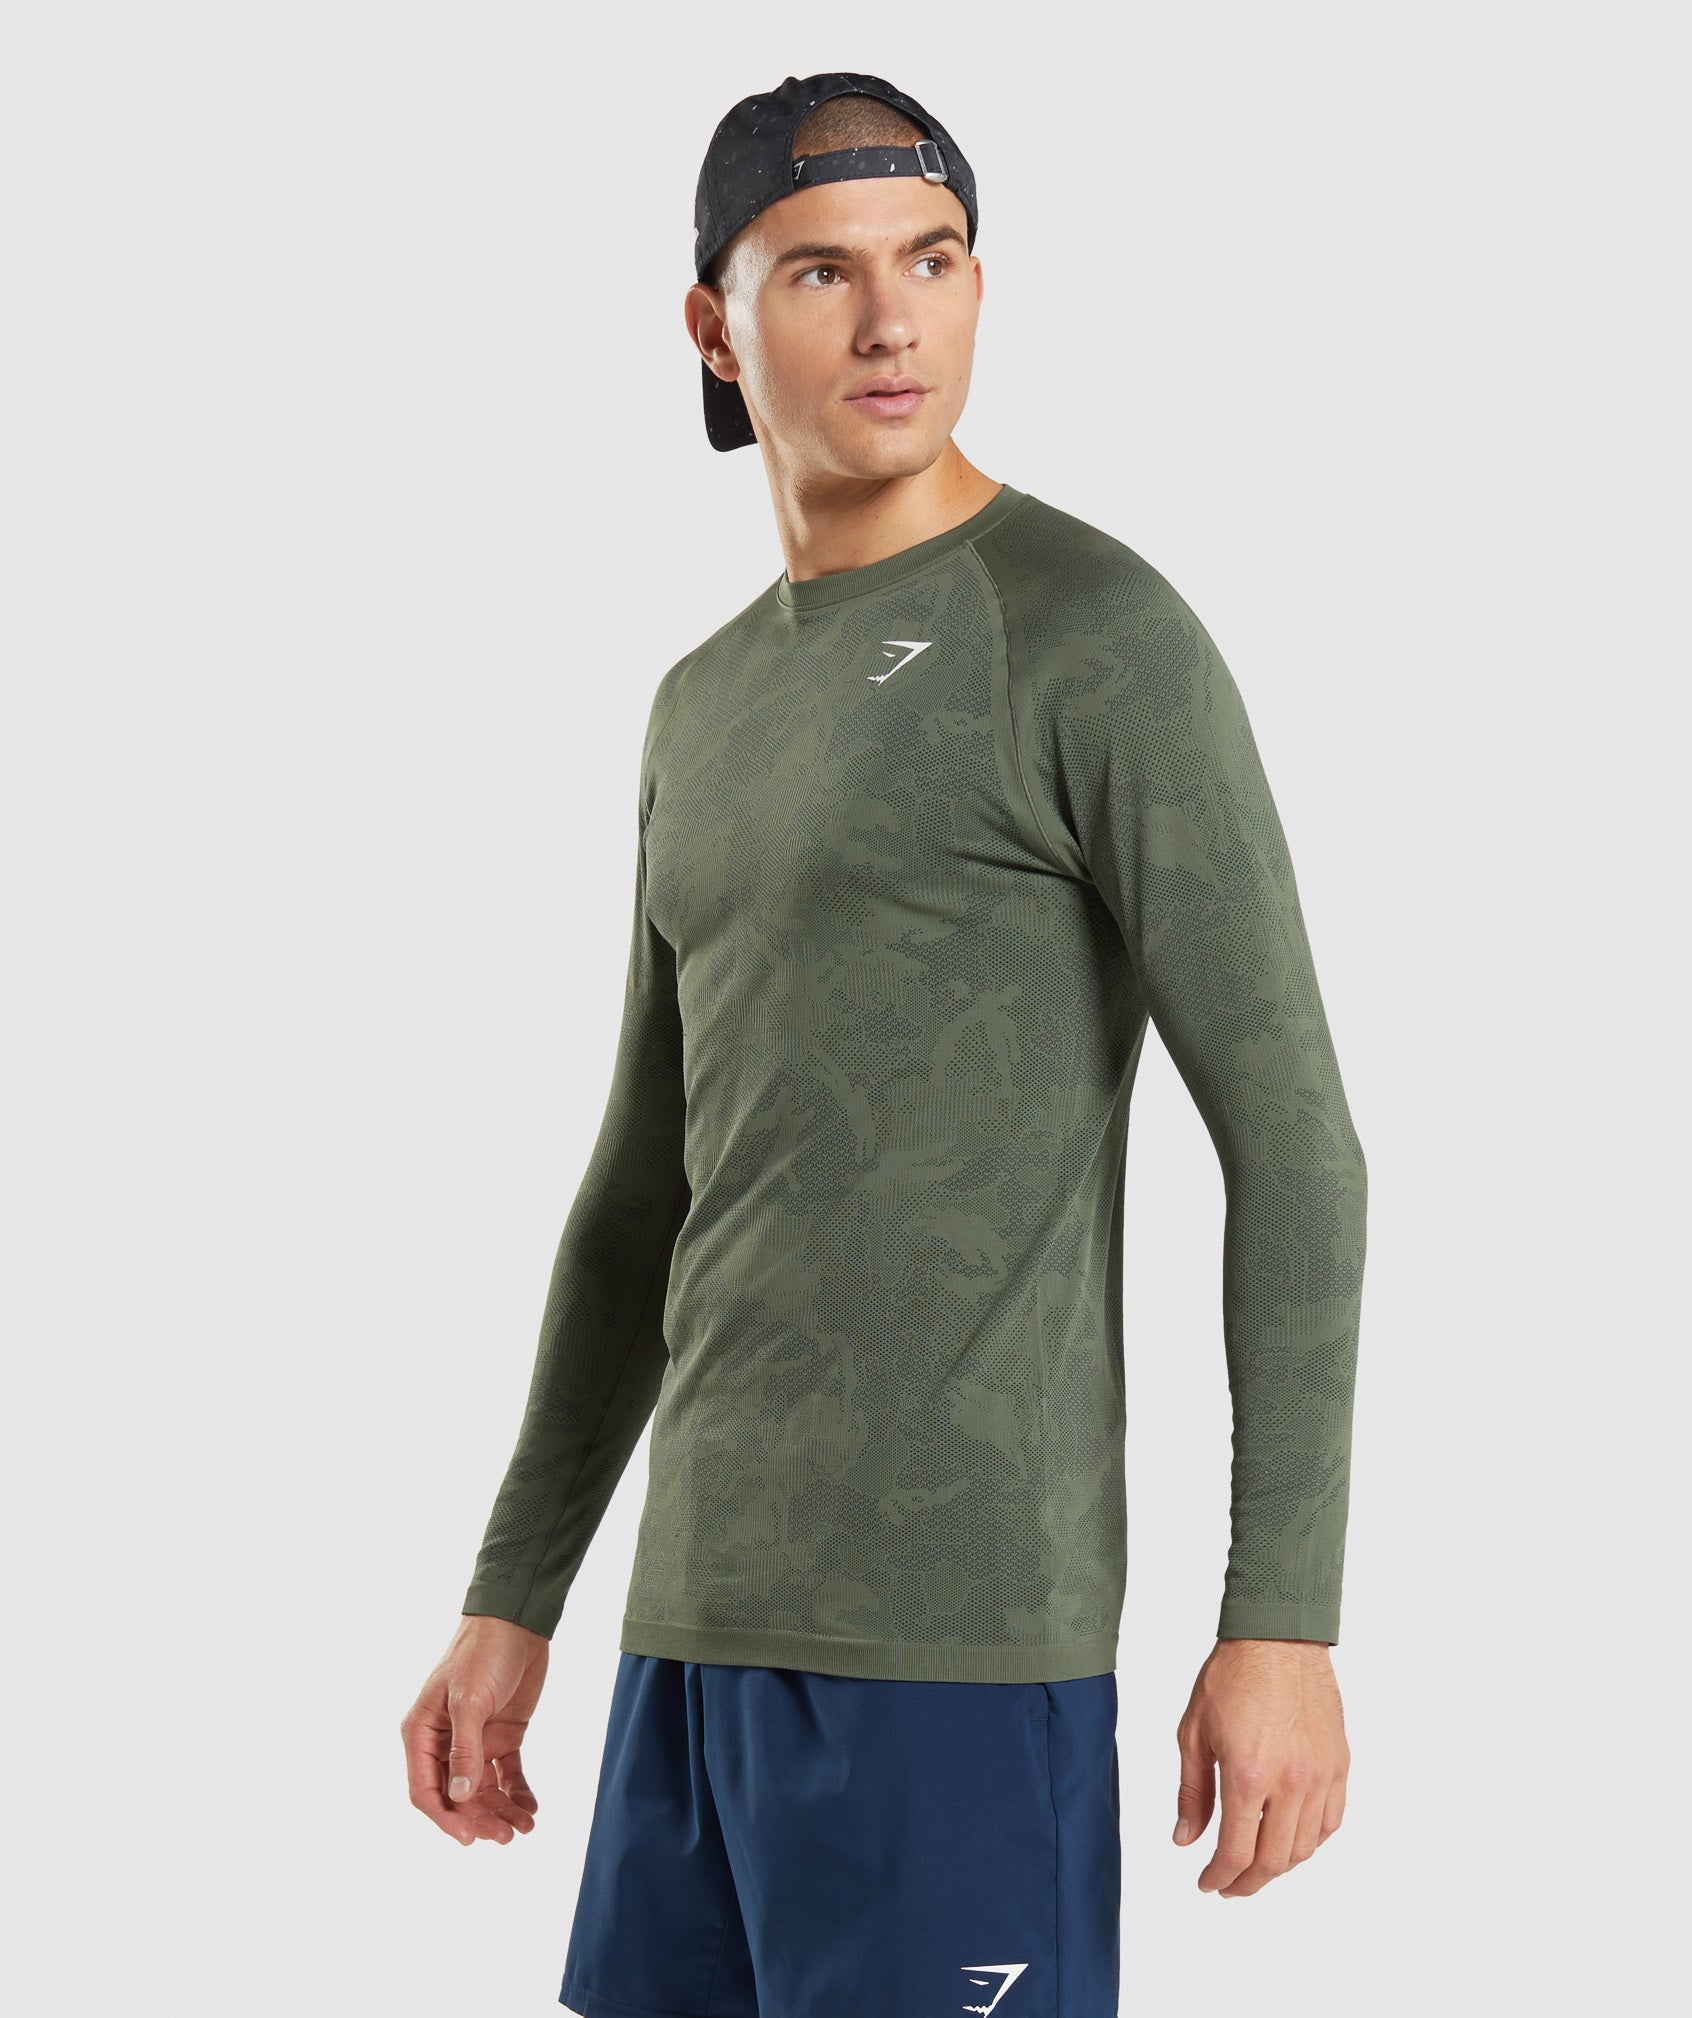 Geo Seamless Long Sleeve T-Shirt in Core Olive/Black - view 3